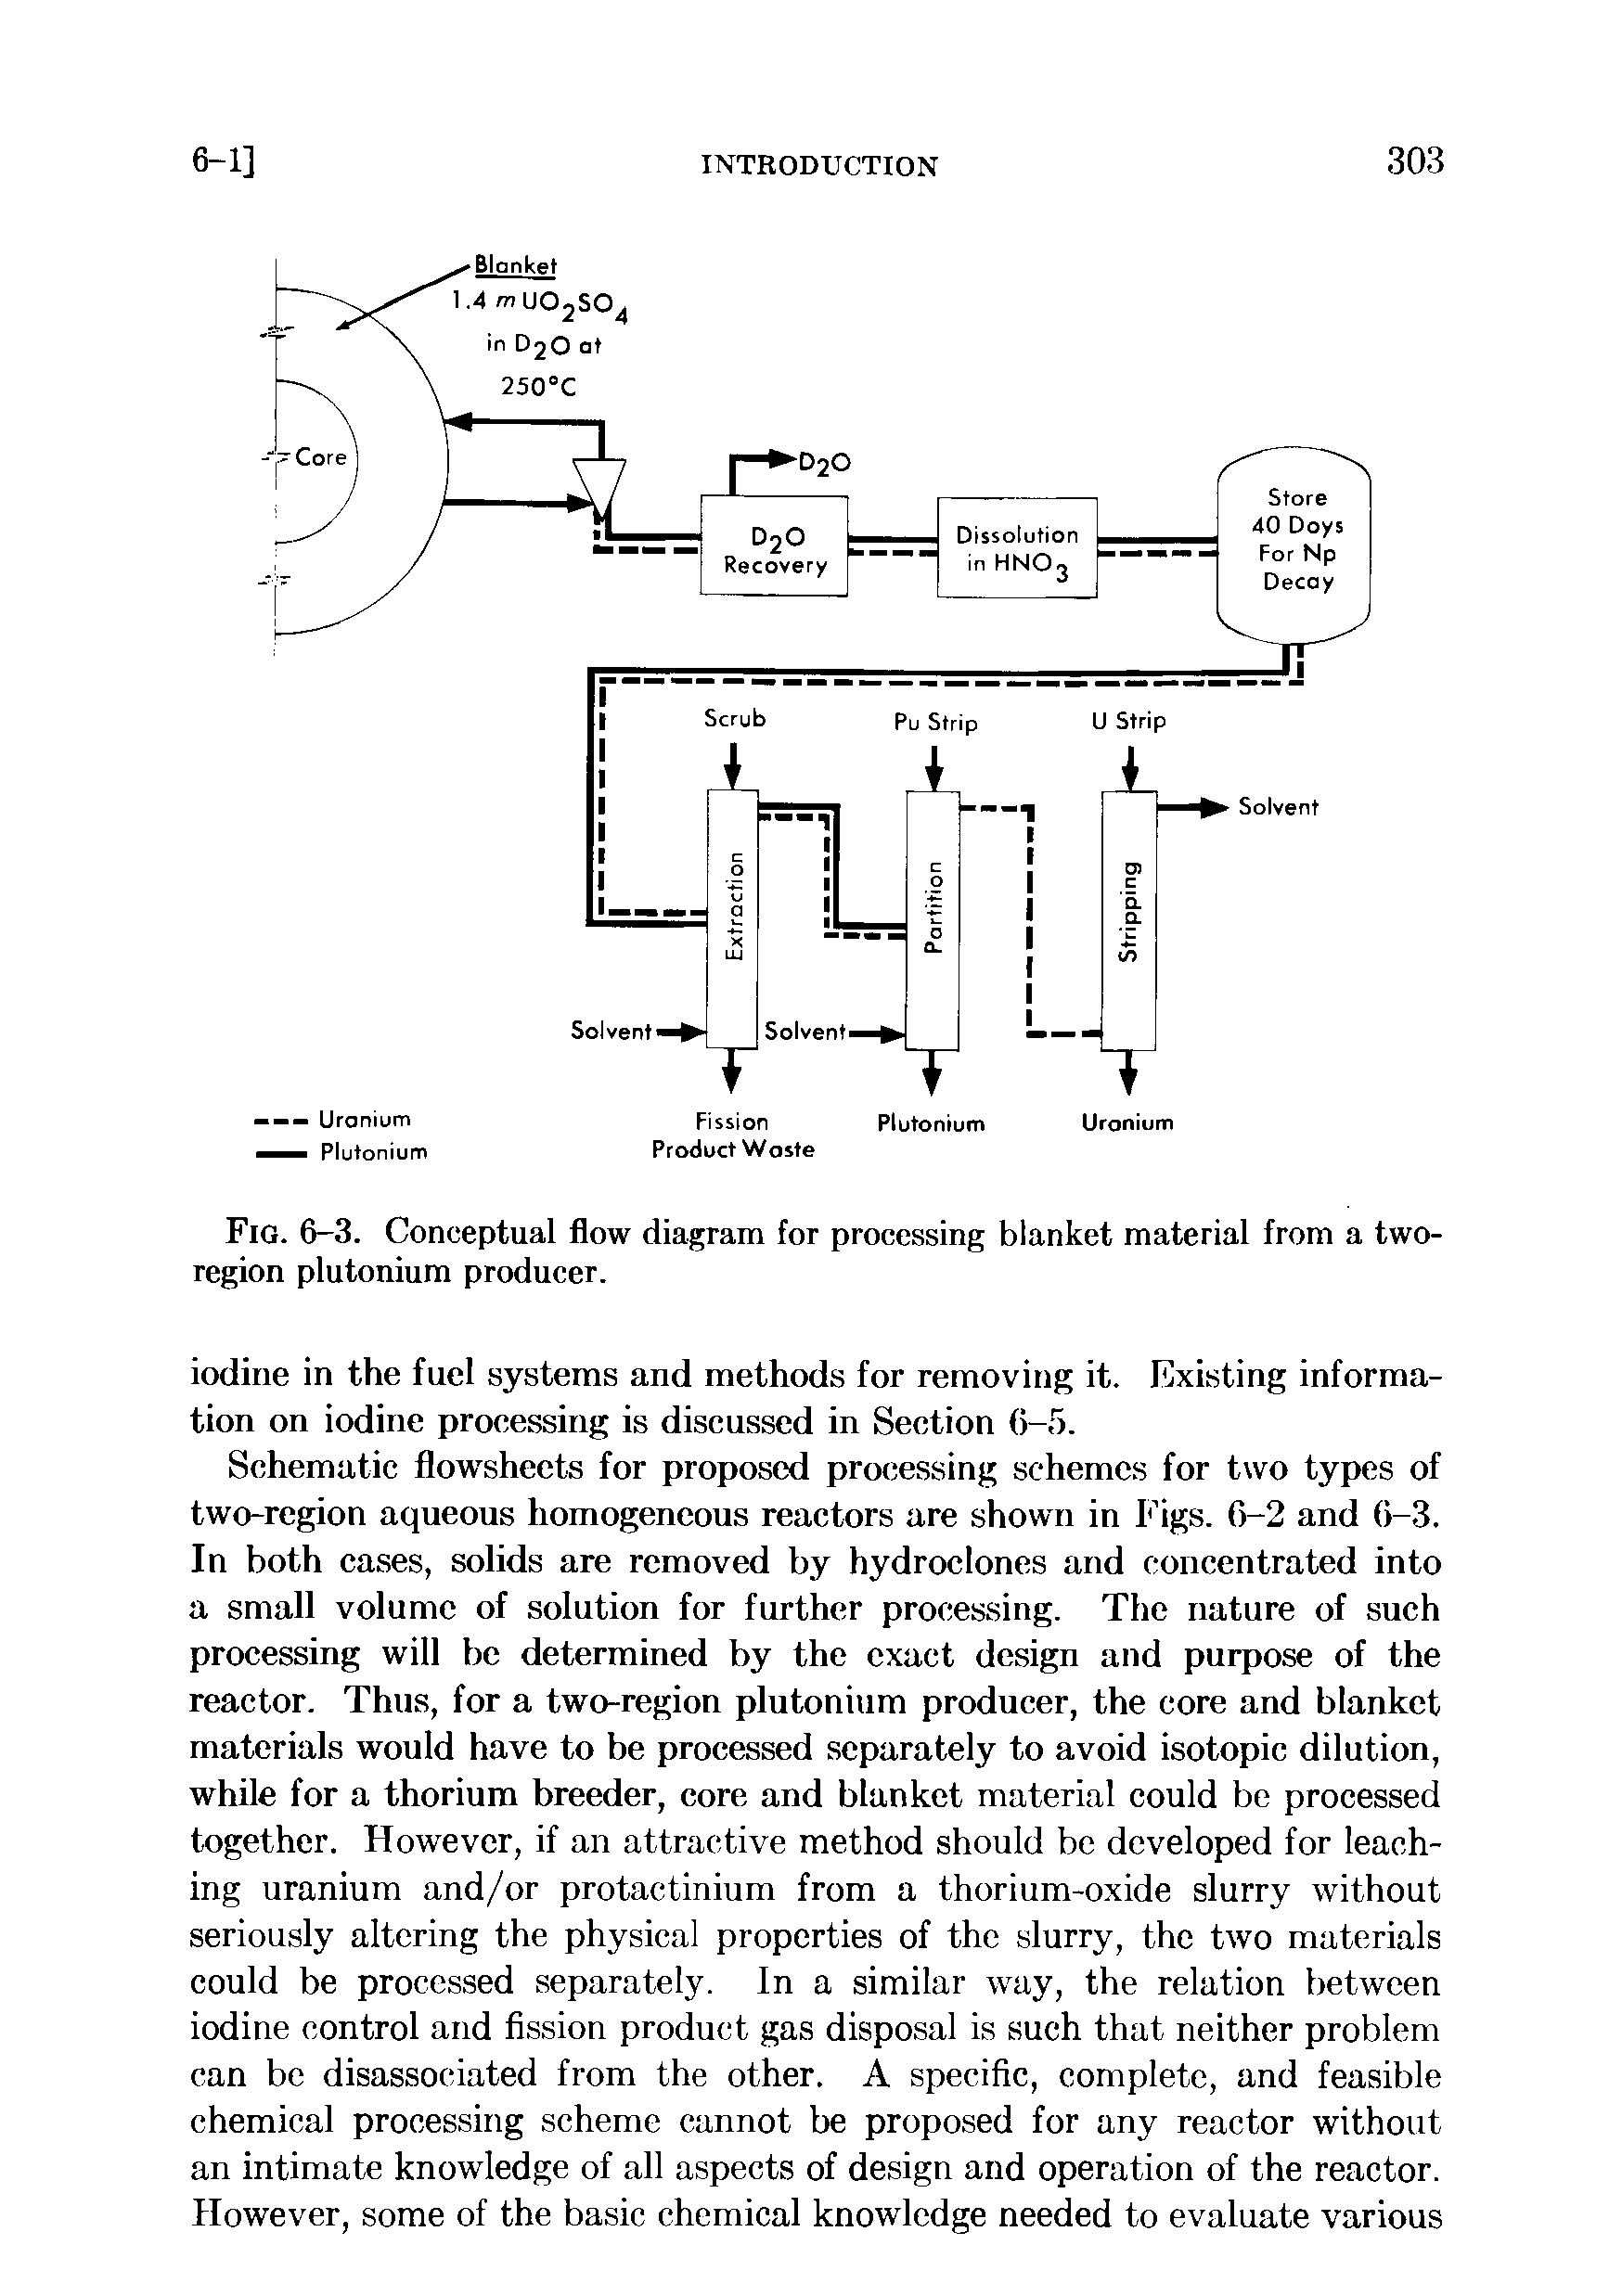 Fig. 6-3. Conceptual flow diagram for processing blanket material from a two-region plutonium producer.